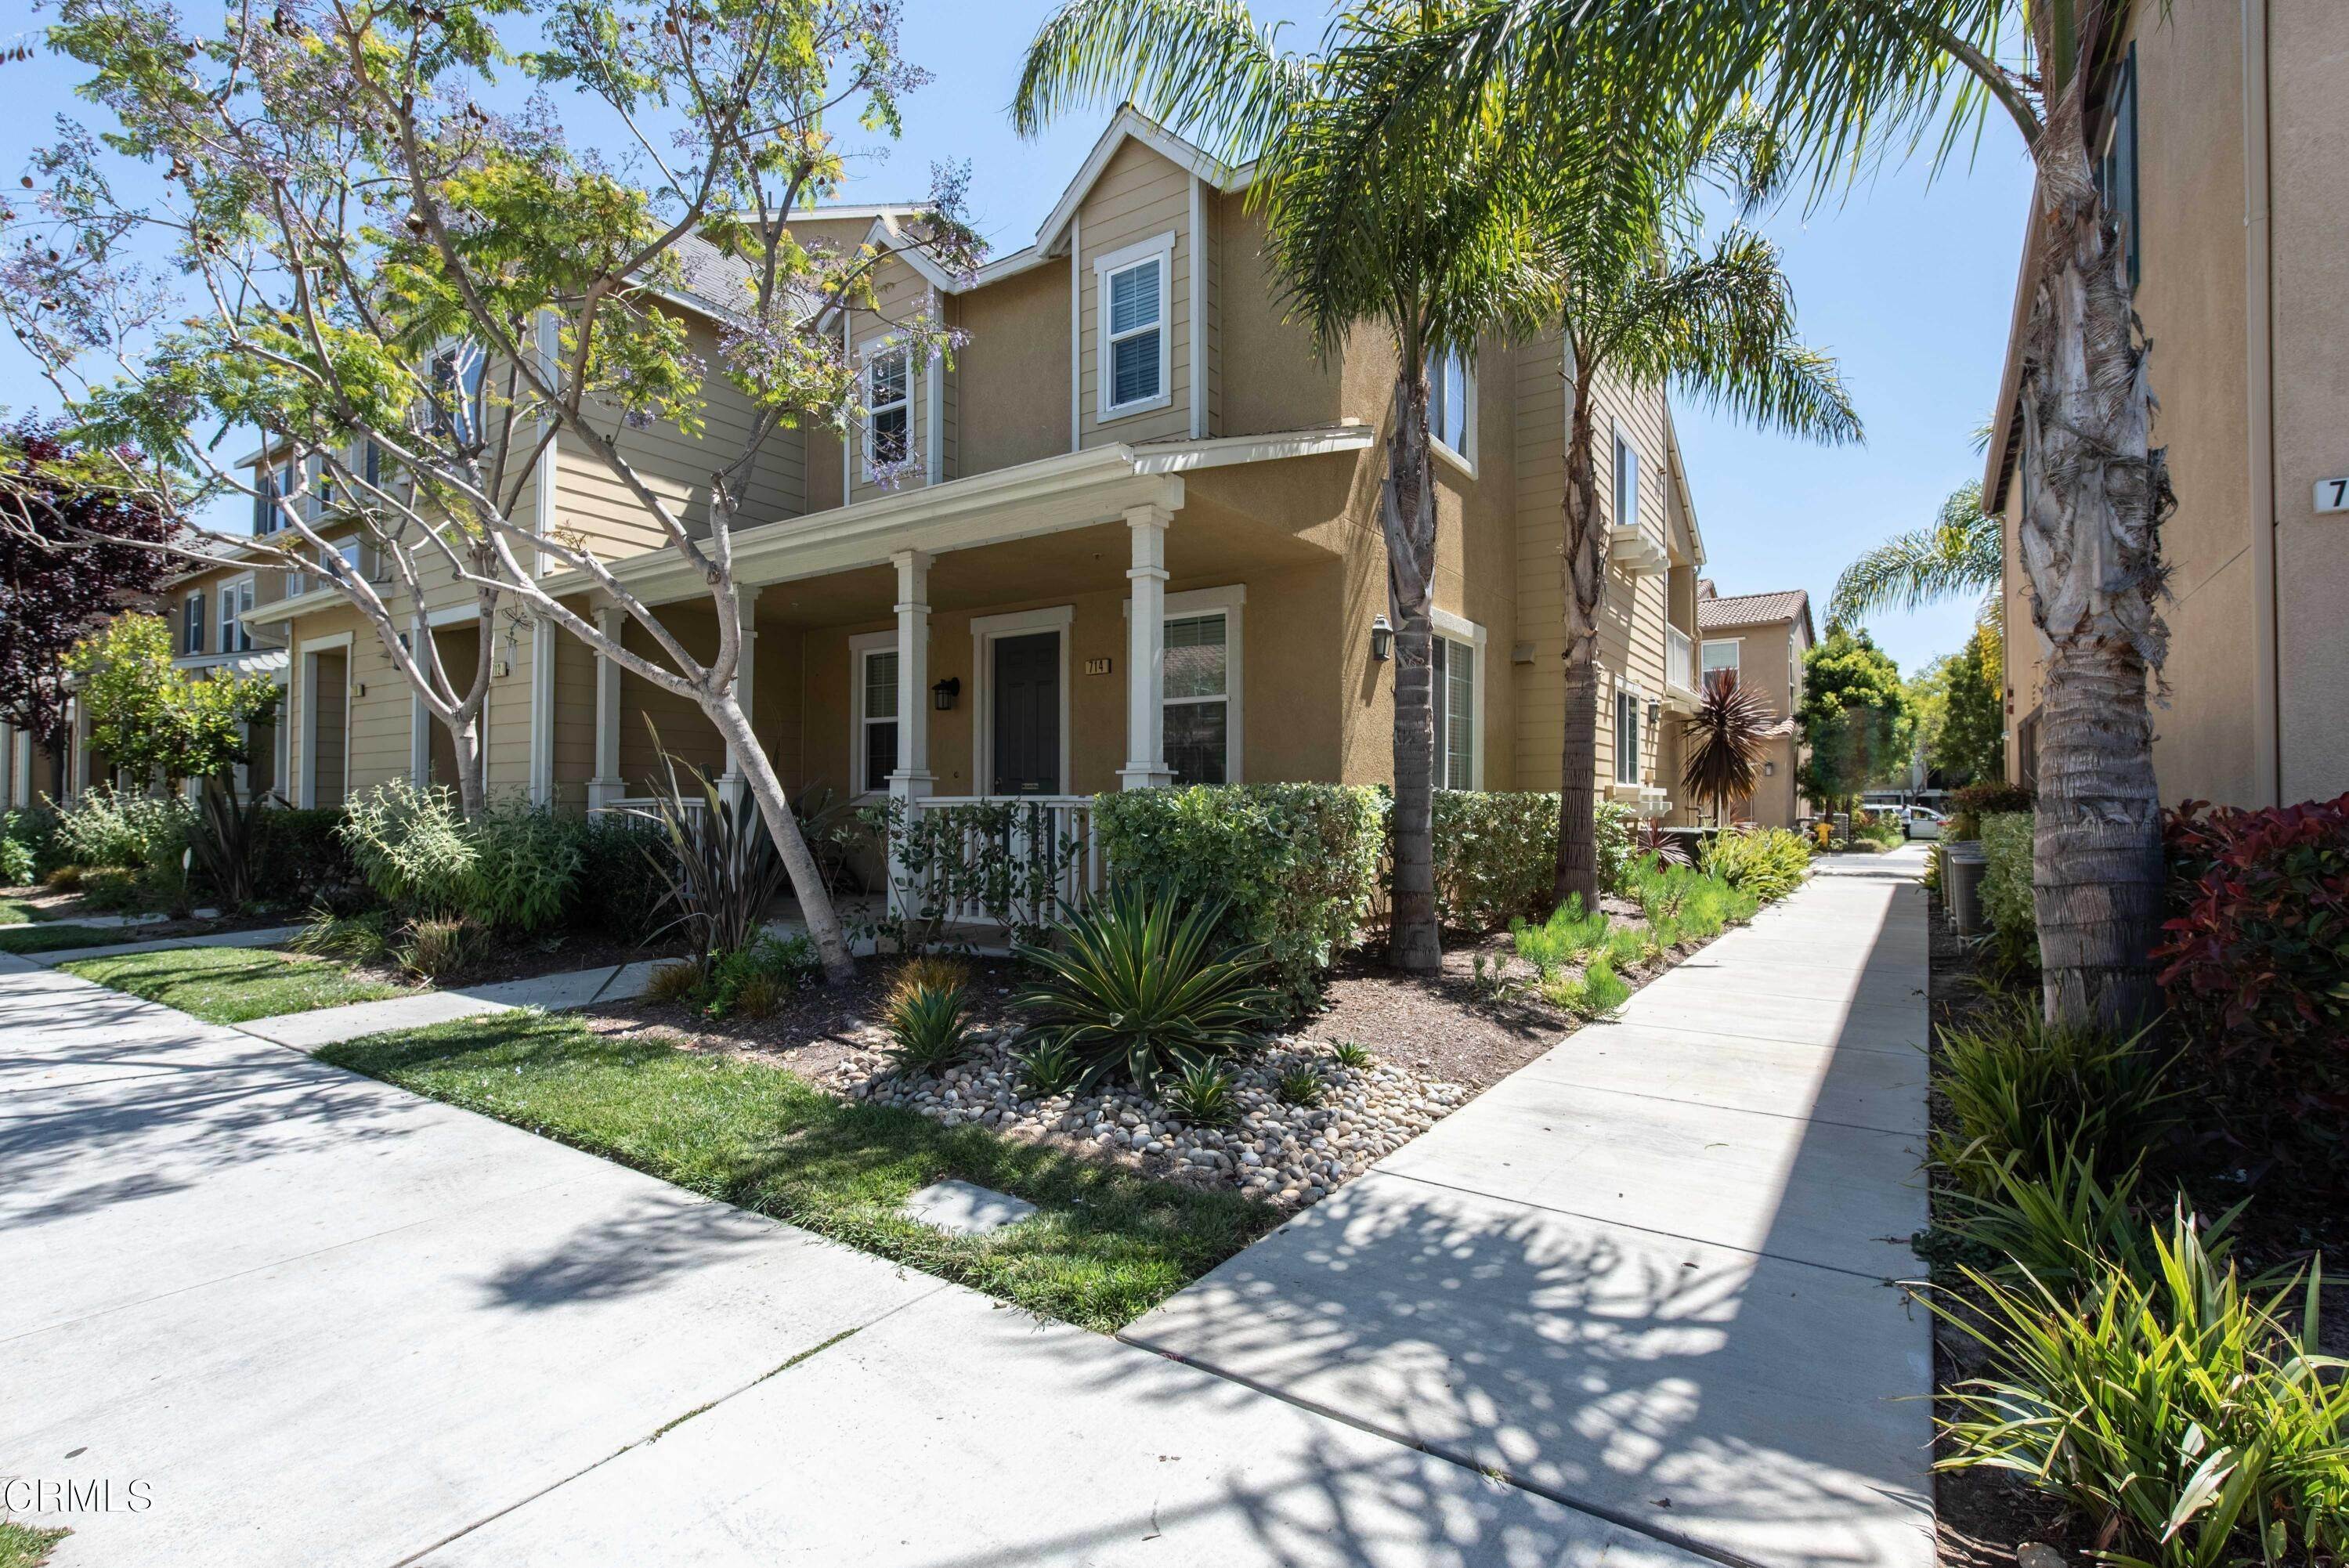 2. Townhouse for Sale at 714 Flathead River Street Oxnard, California 93036 United States